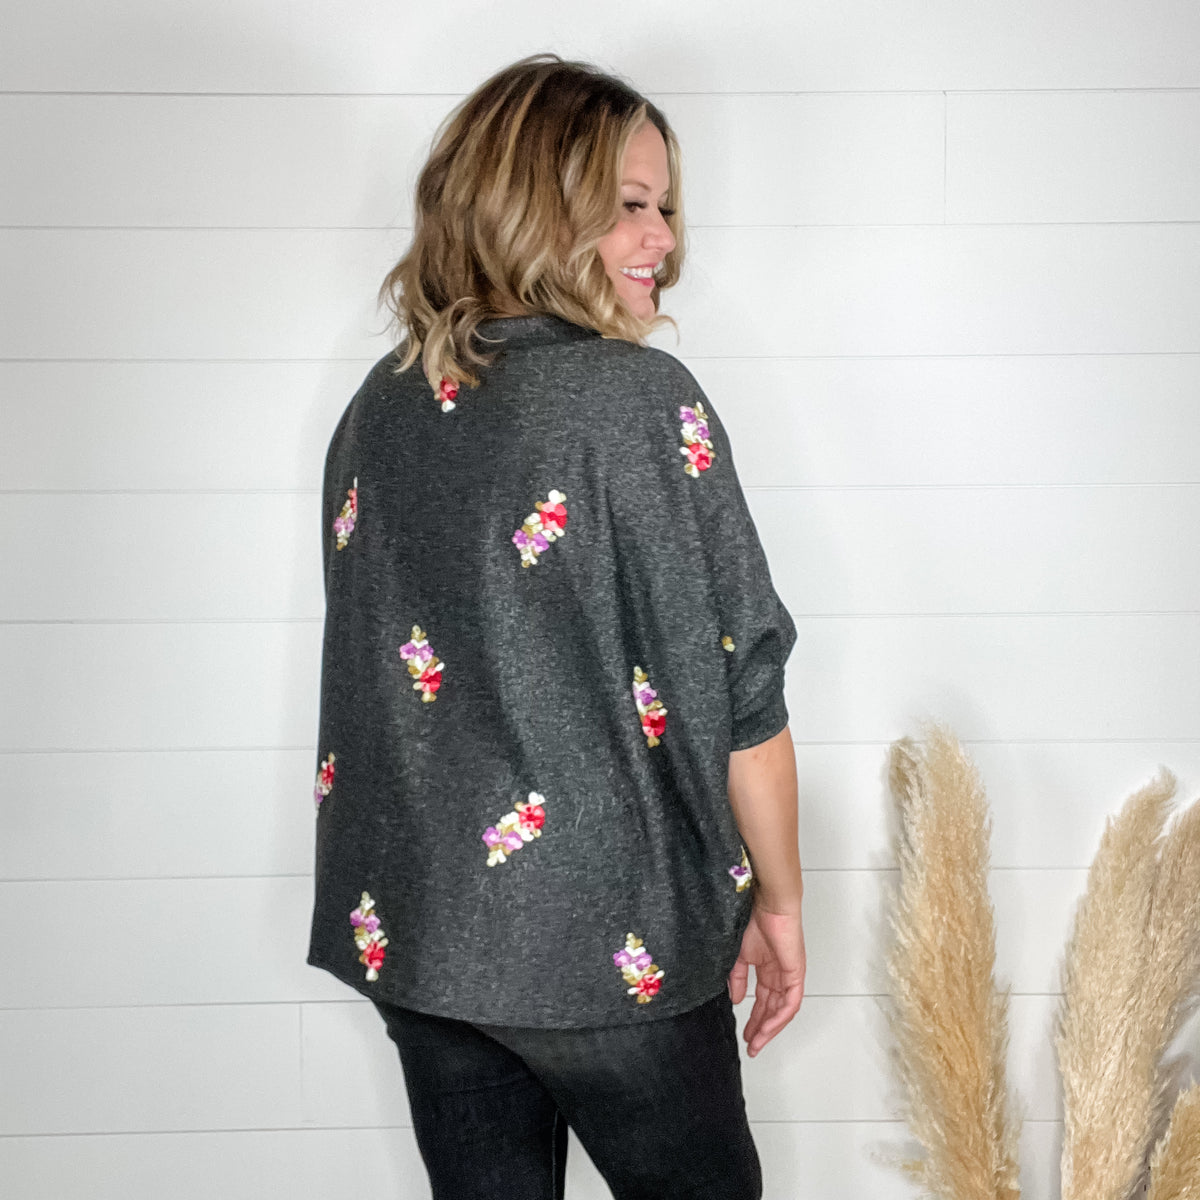 "Deceptive" Floral Embroidered Short Sleeve Dolman with Cuff and Collar (Multiple Options)